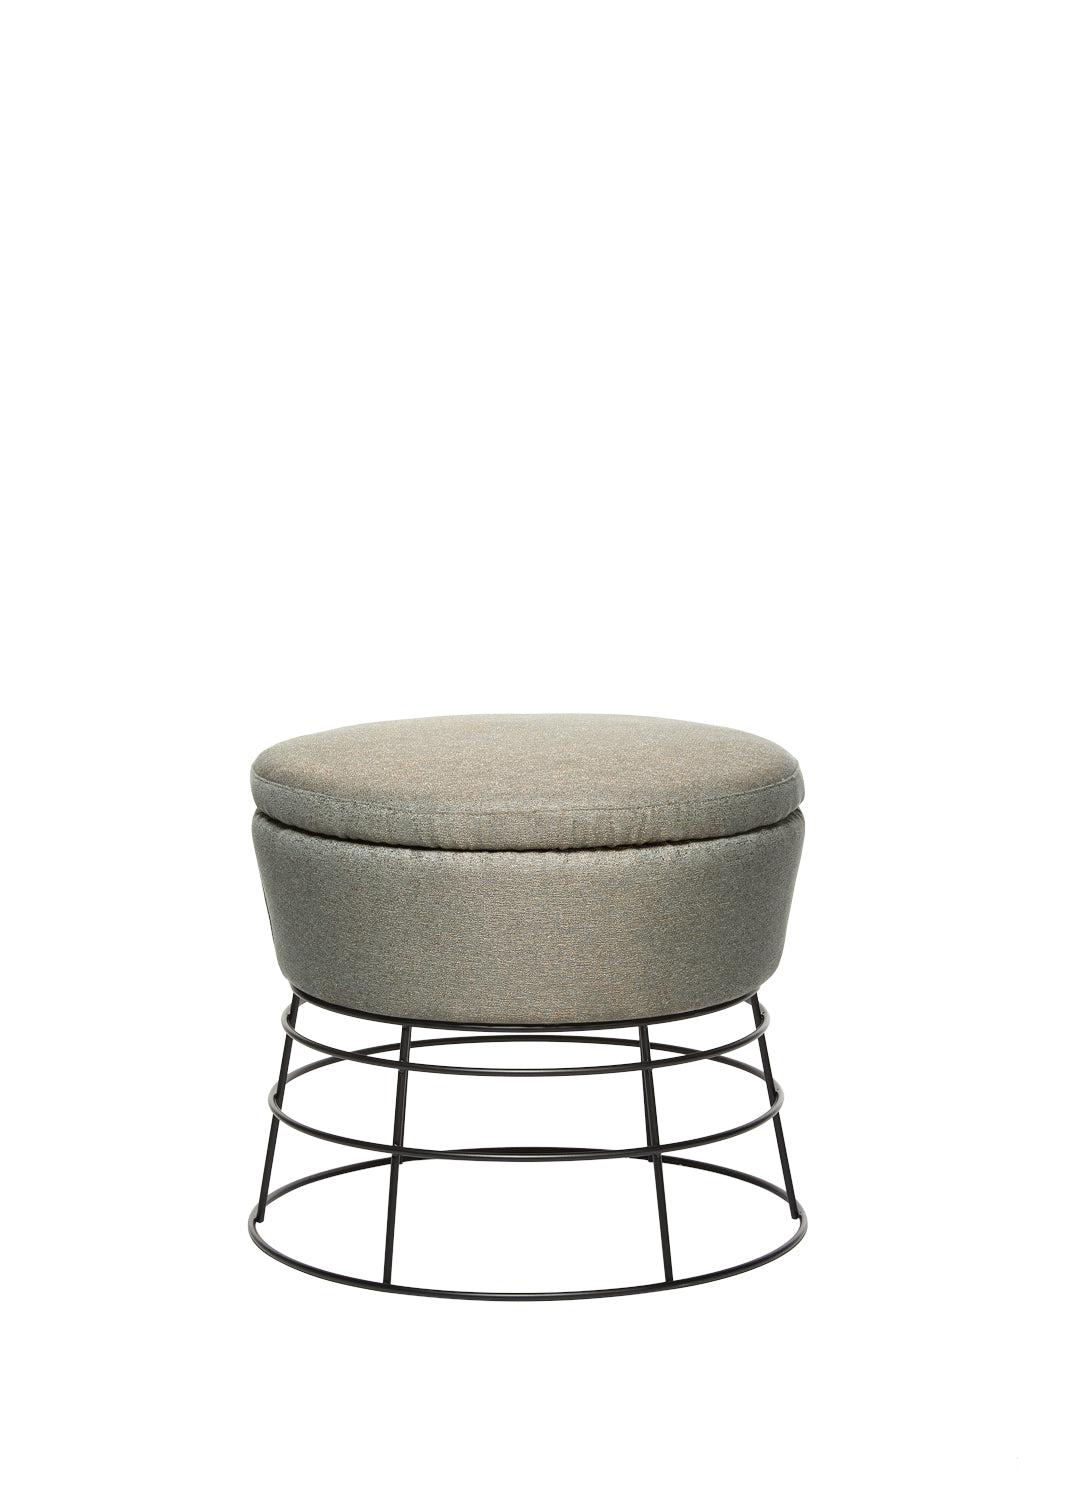 Clepsydra Pouf1 Metal-Accento-Contract Furniture Store